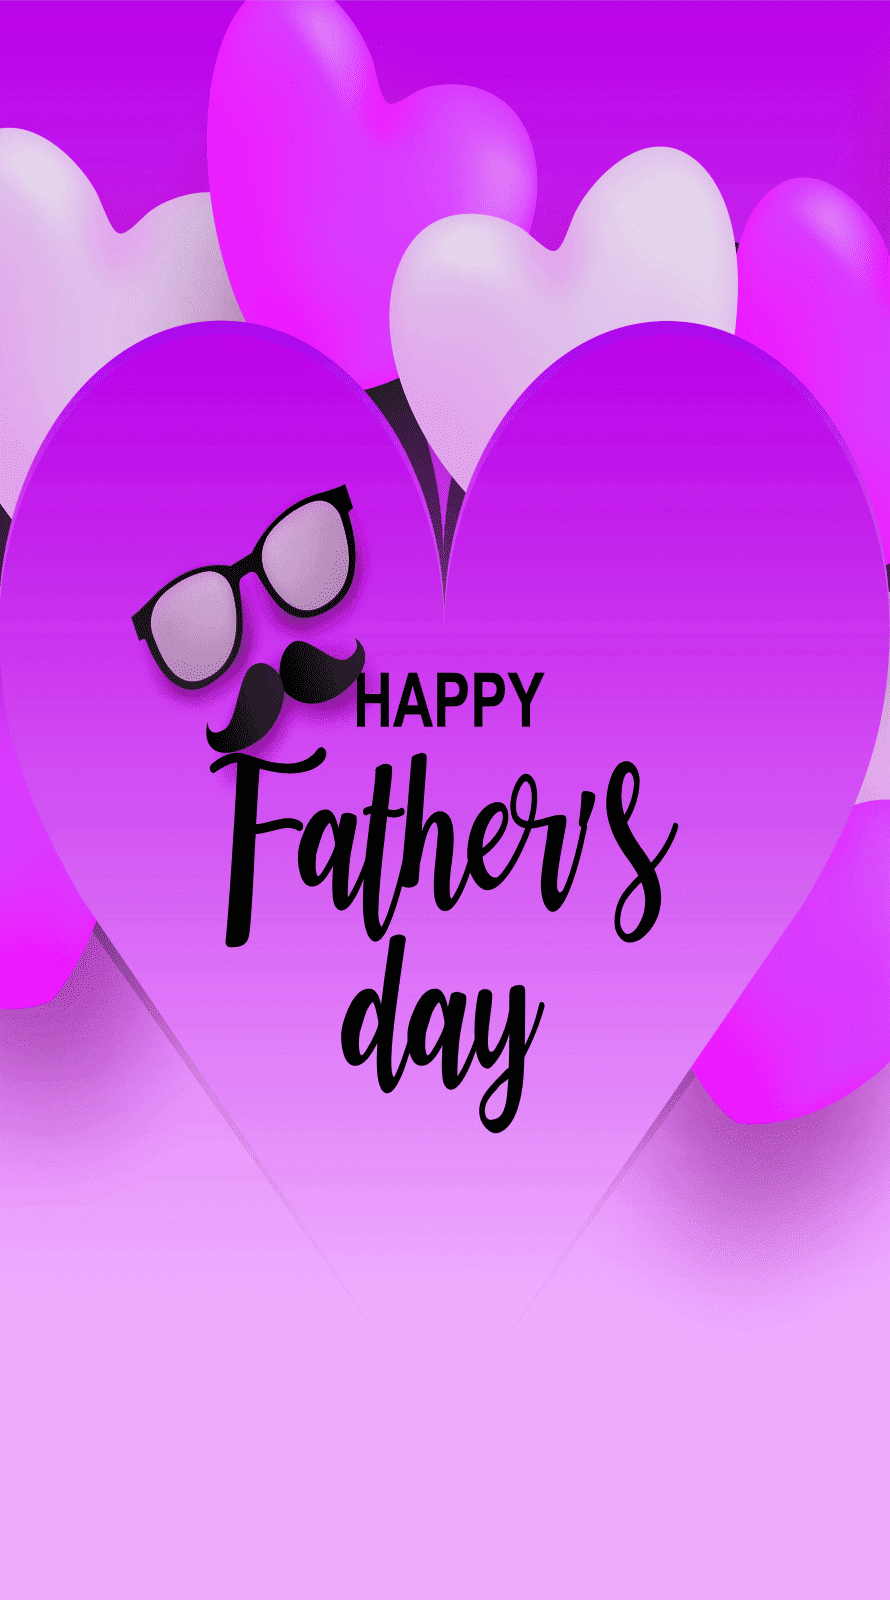 Super cute Happy fathers day wishes background dia del padre happy fathers day images 2022